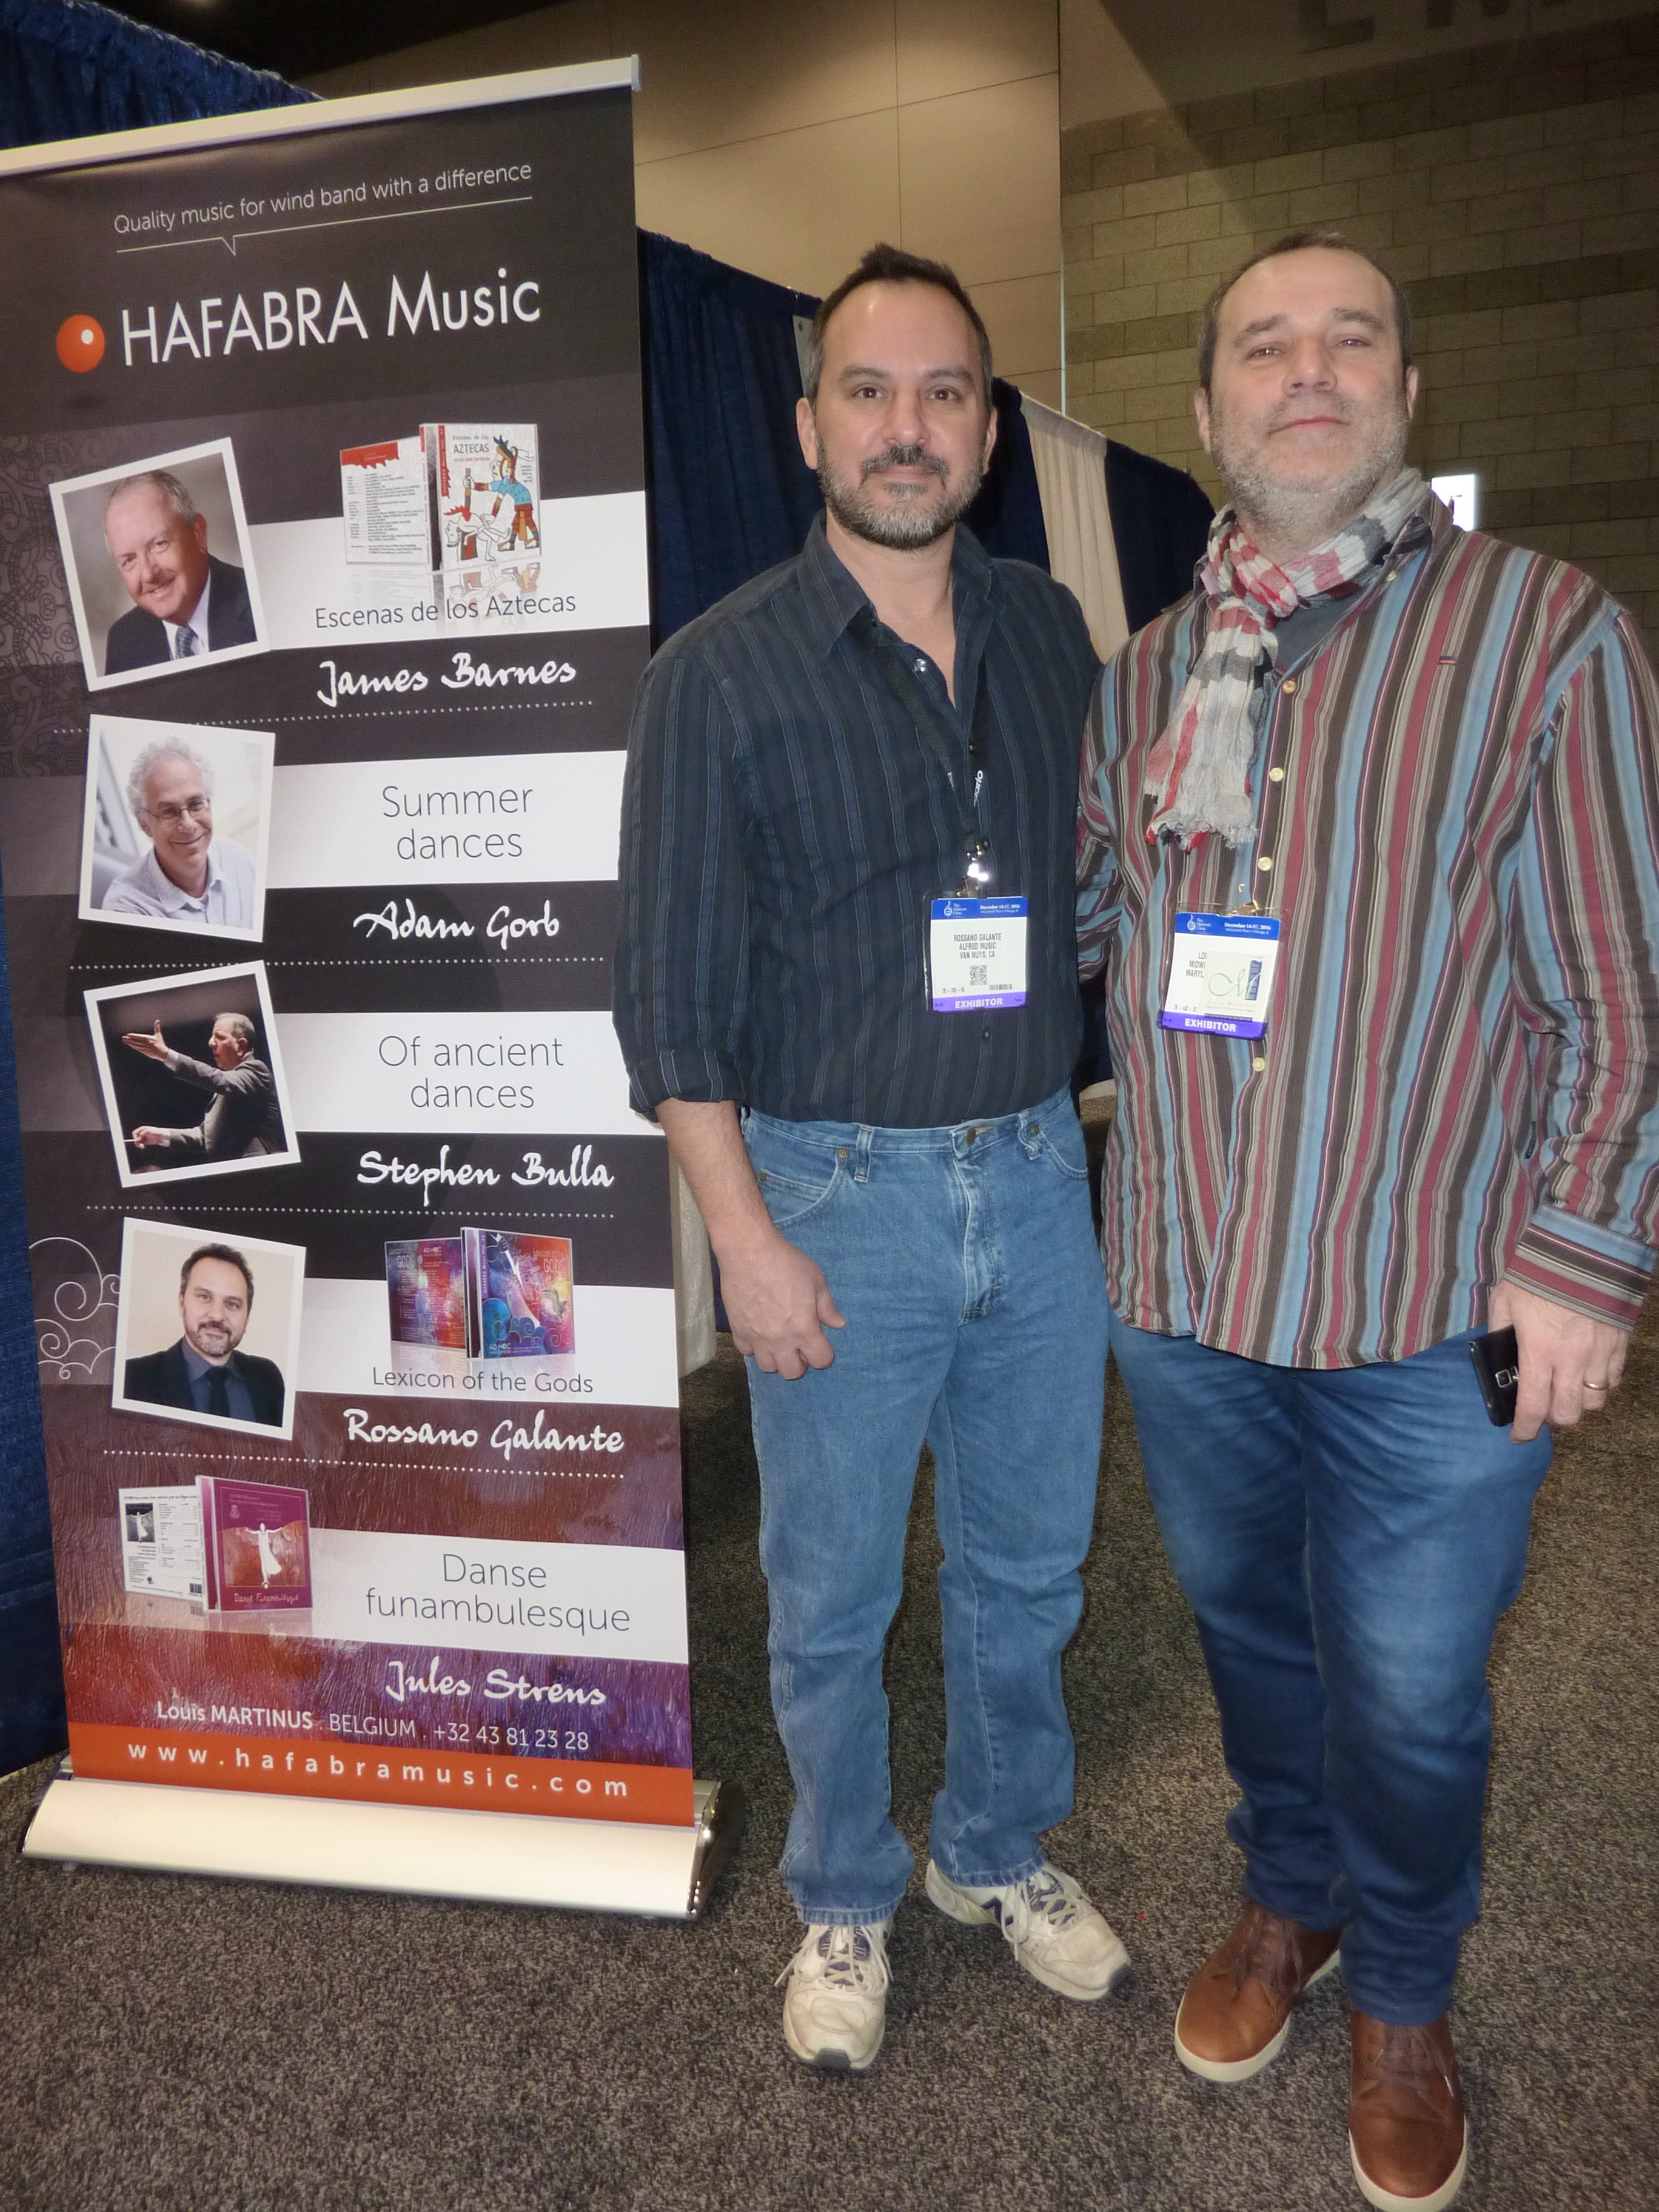 Louis Martinus with Rossano Galante in Chicago during the Midwest 2016